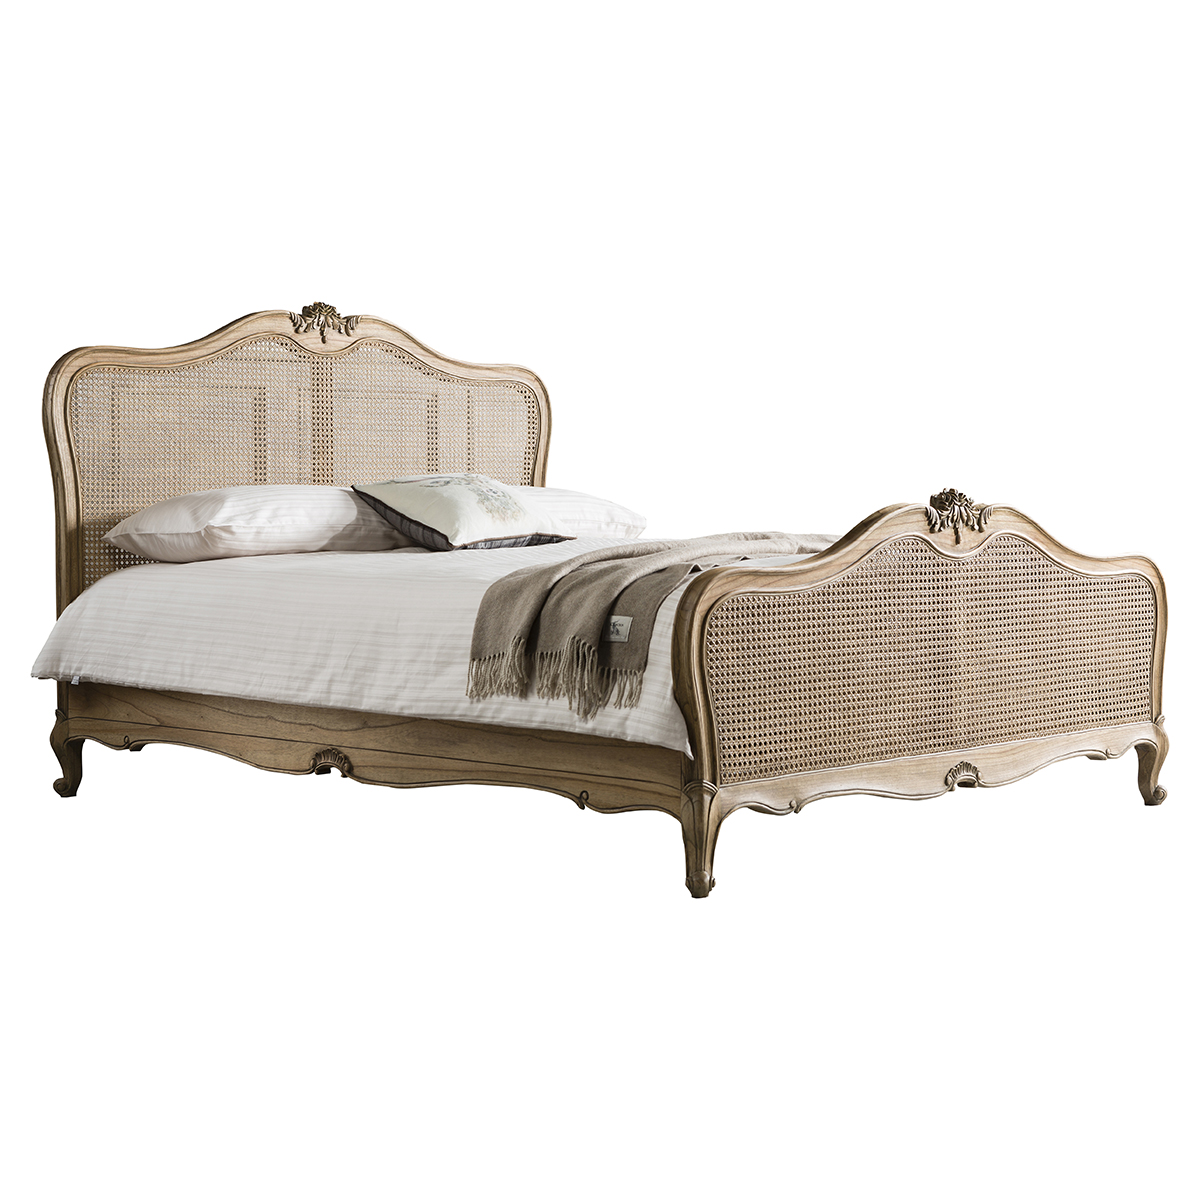 Gallery Direct Chic 6' Cane Bed Weathered